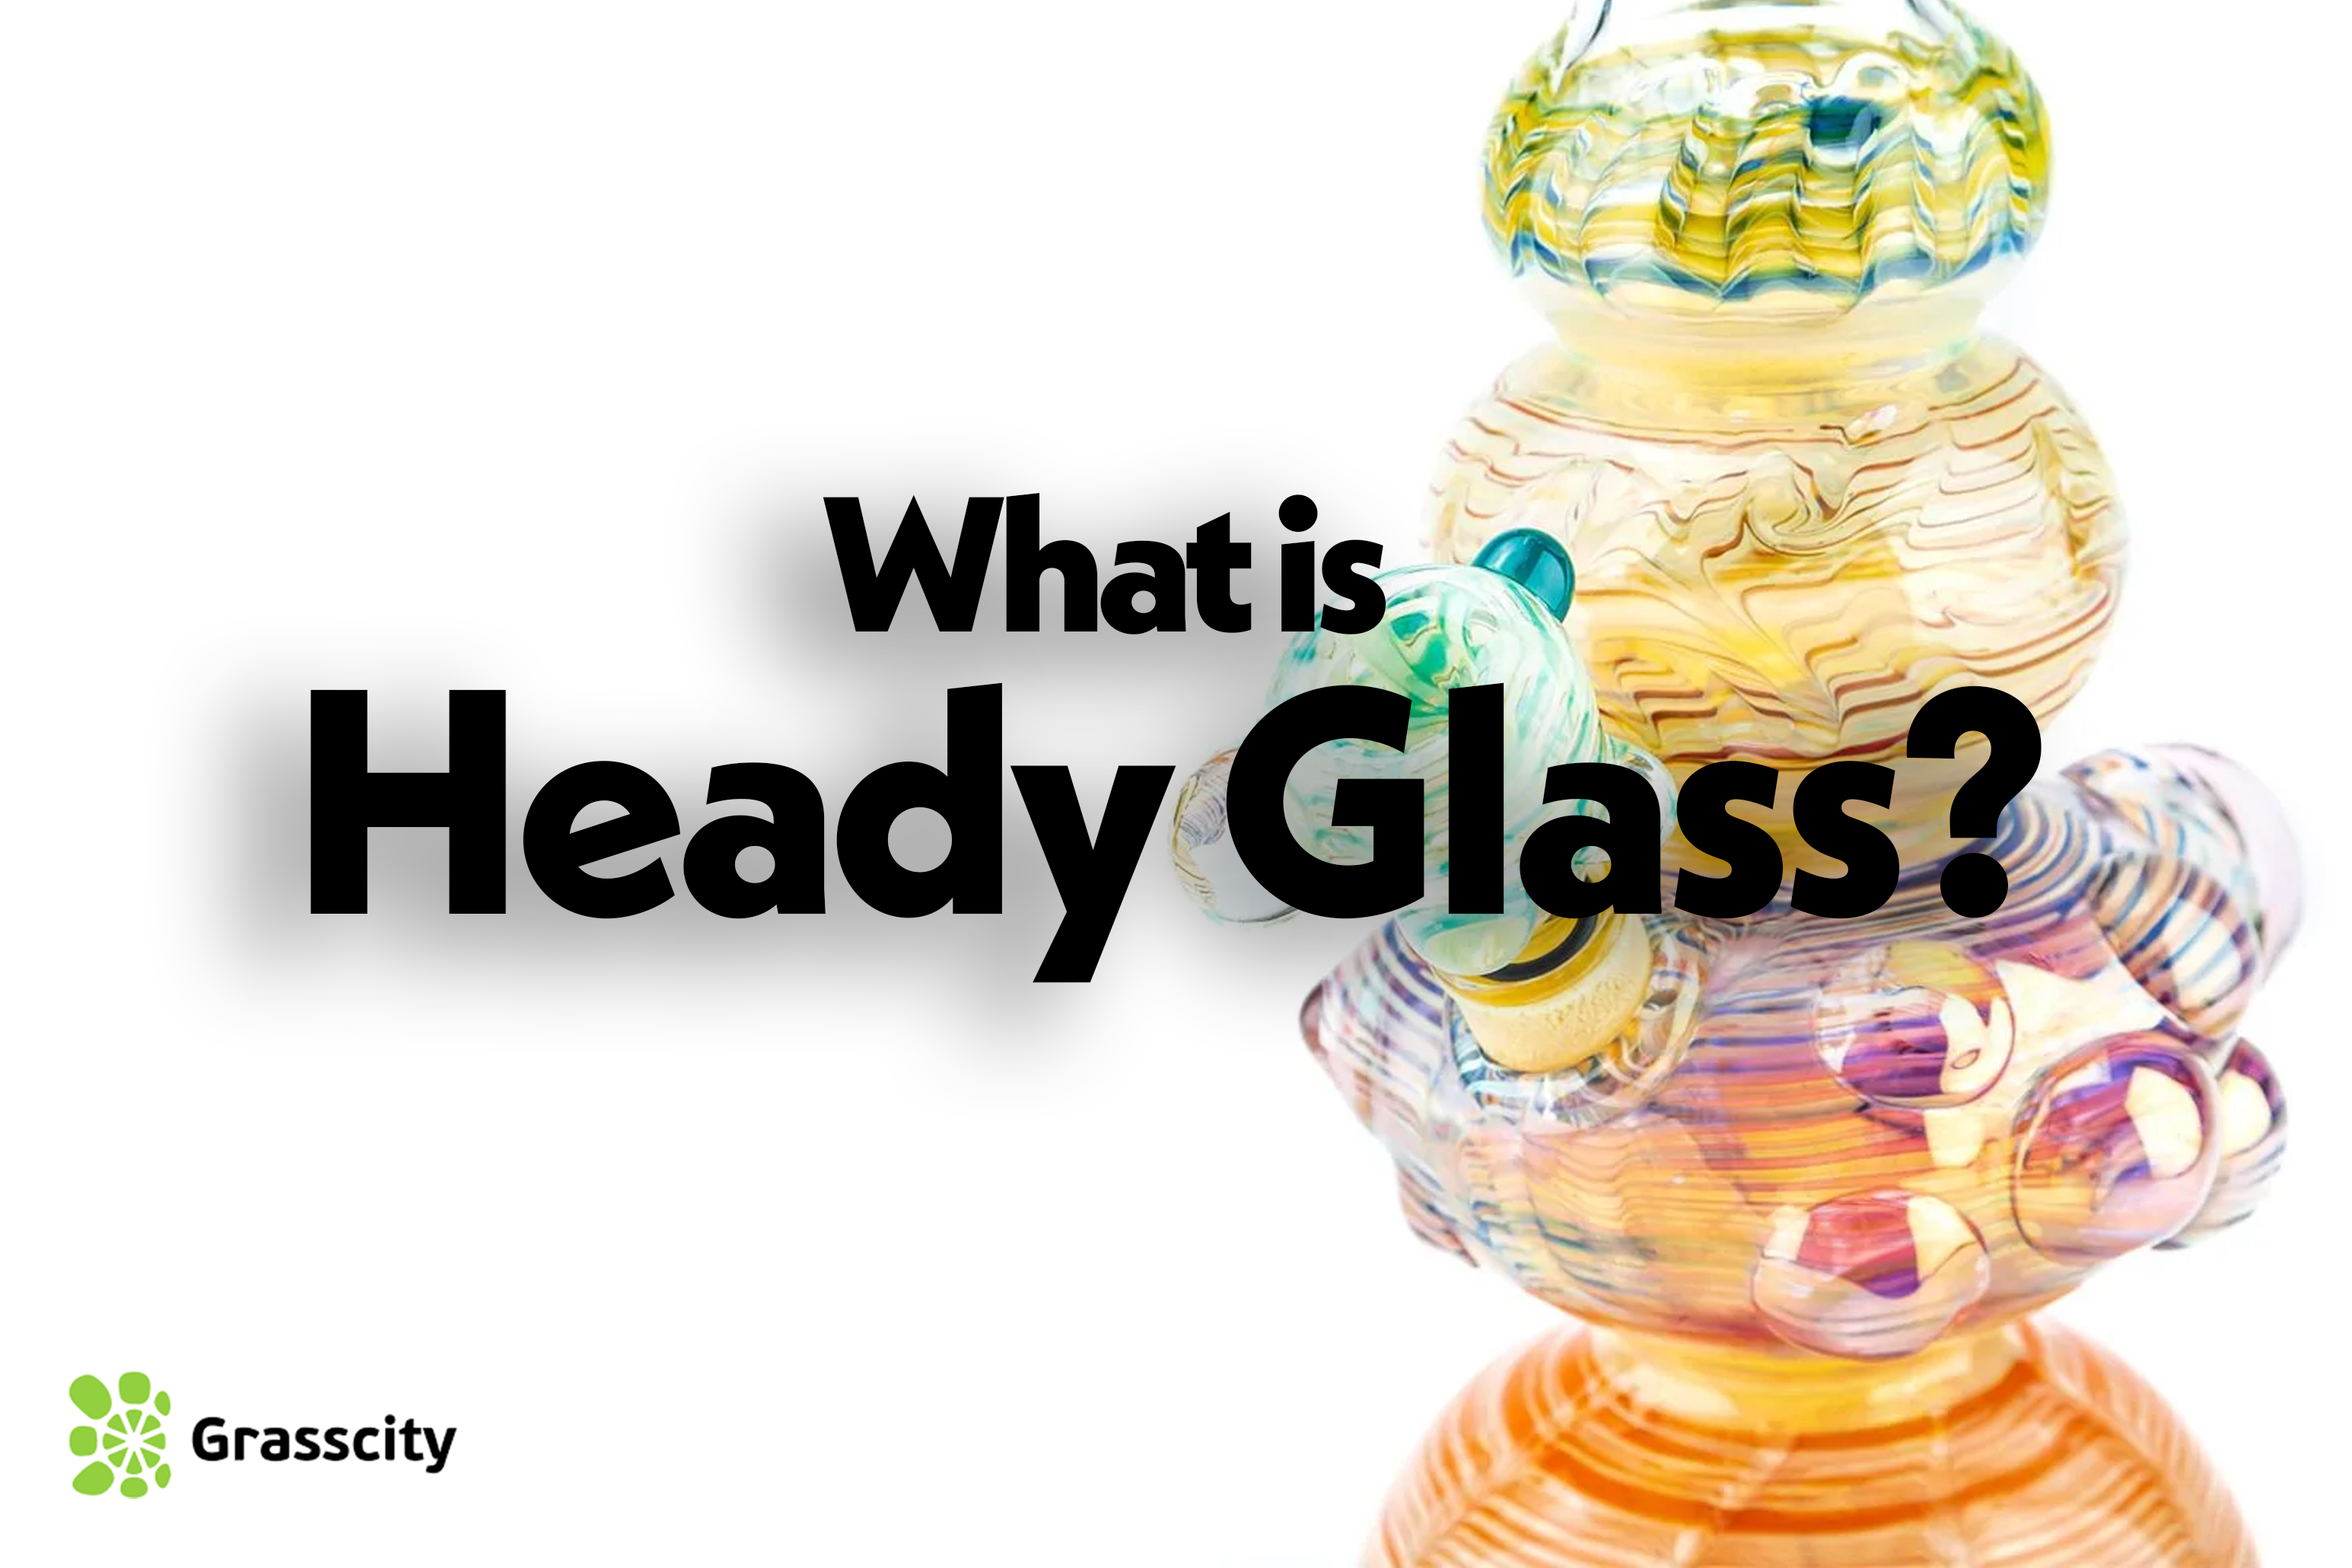 What is heady glass?